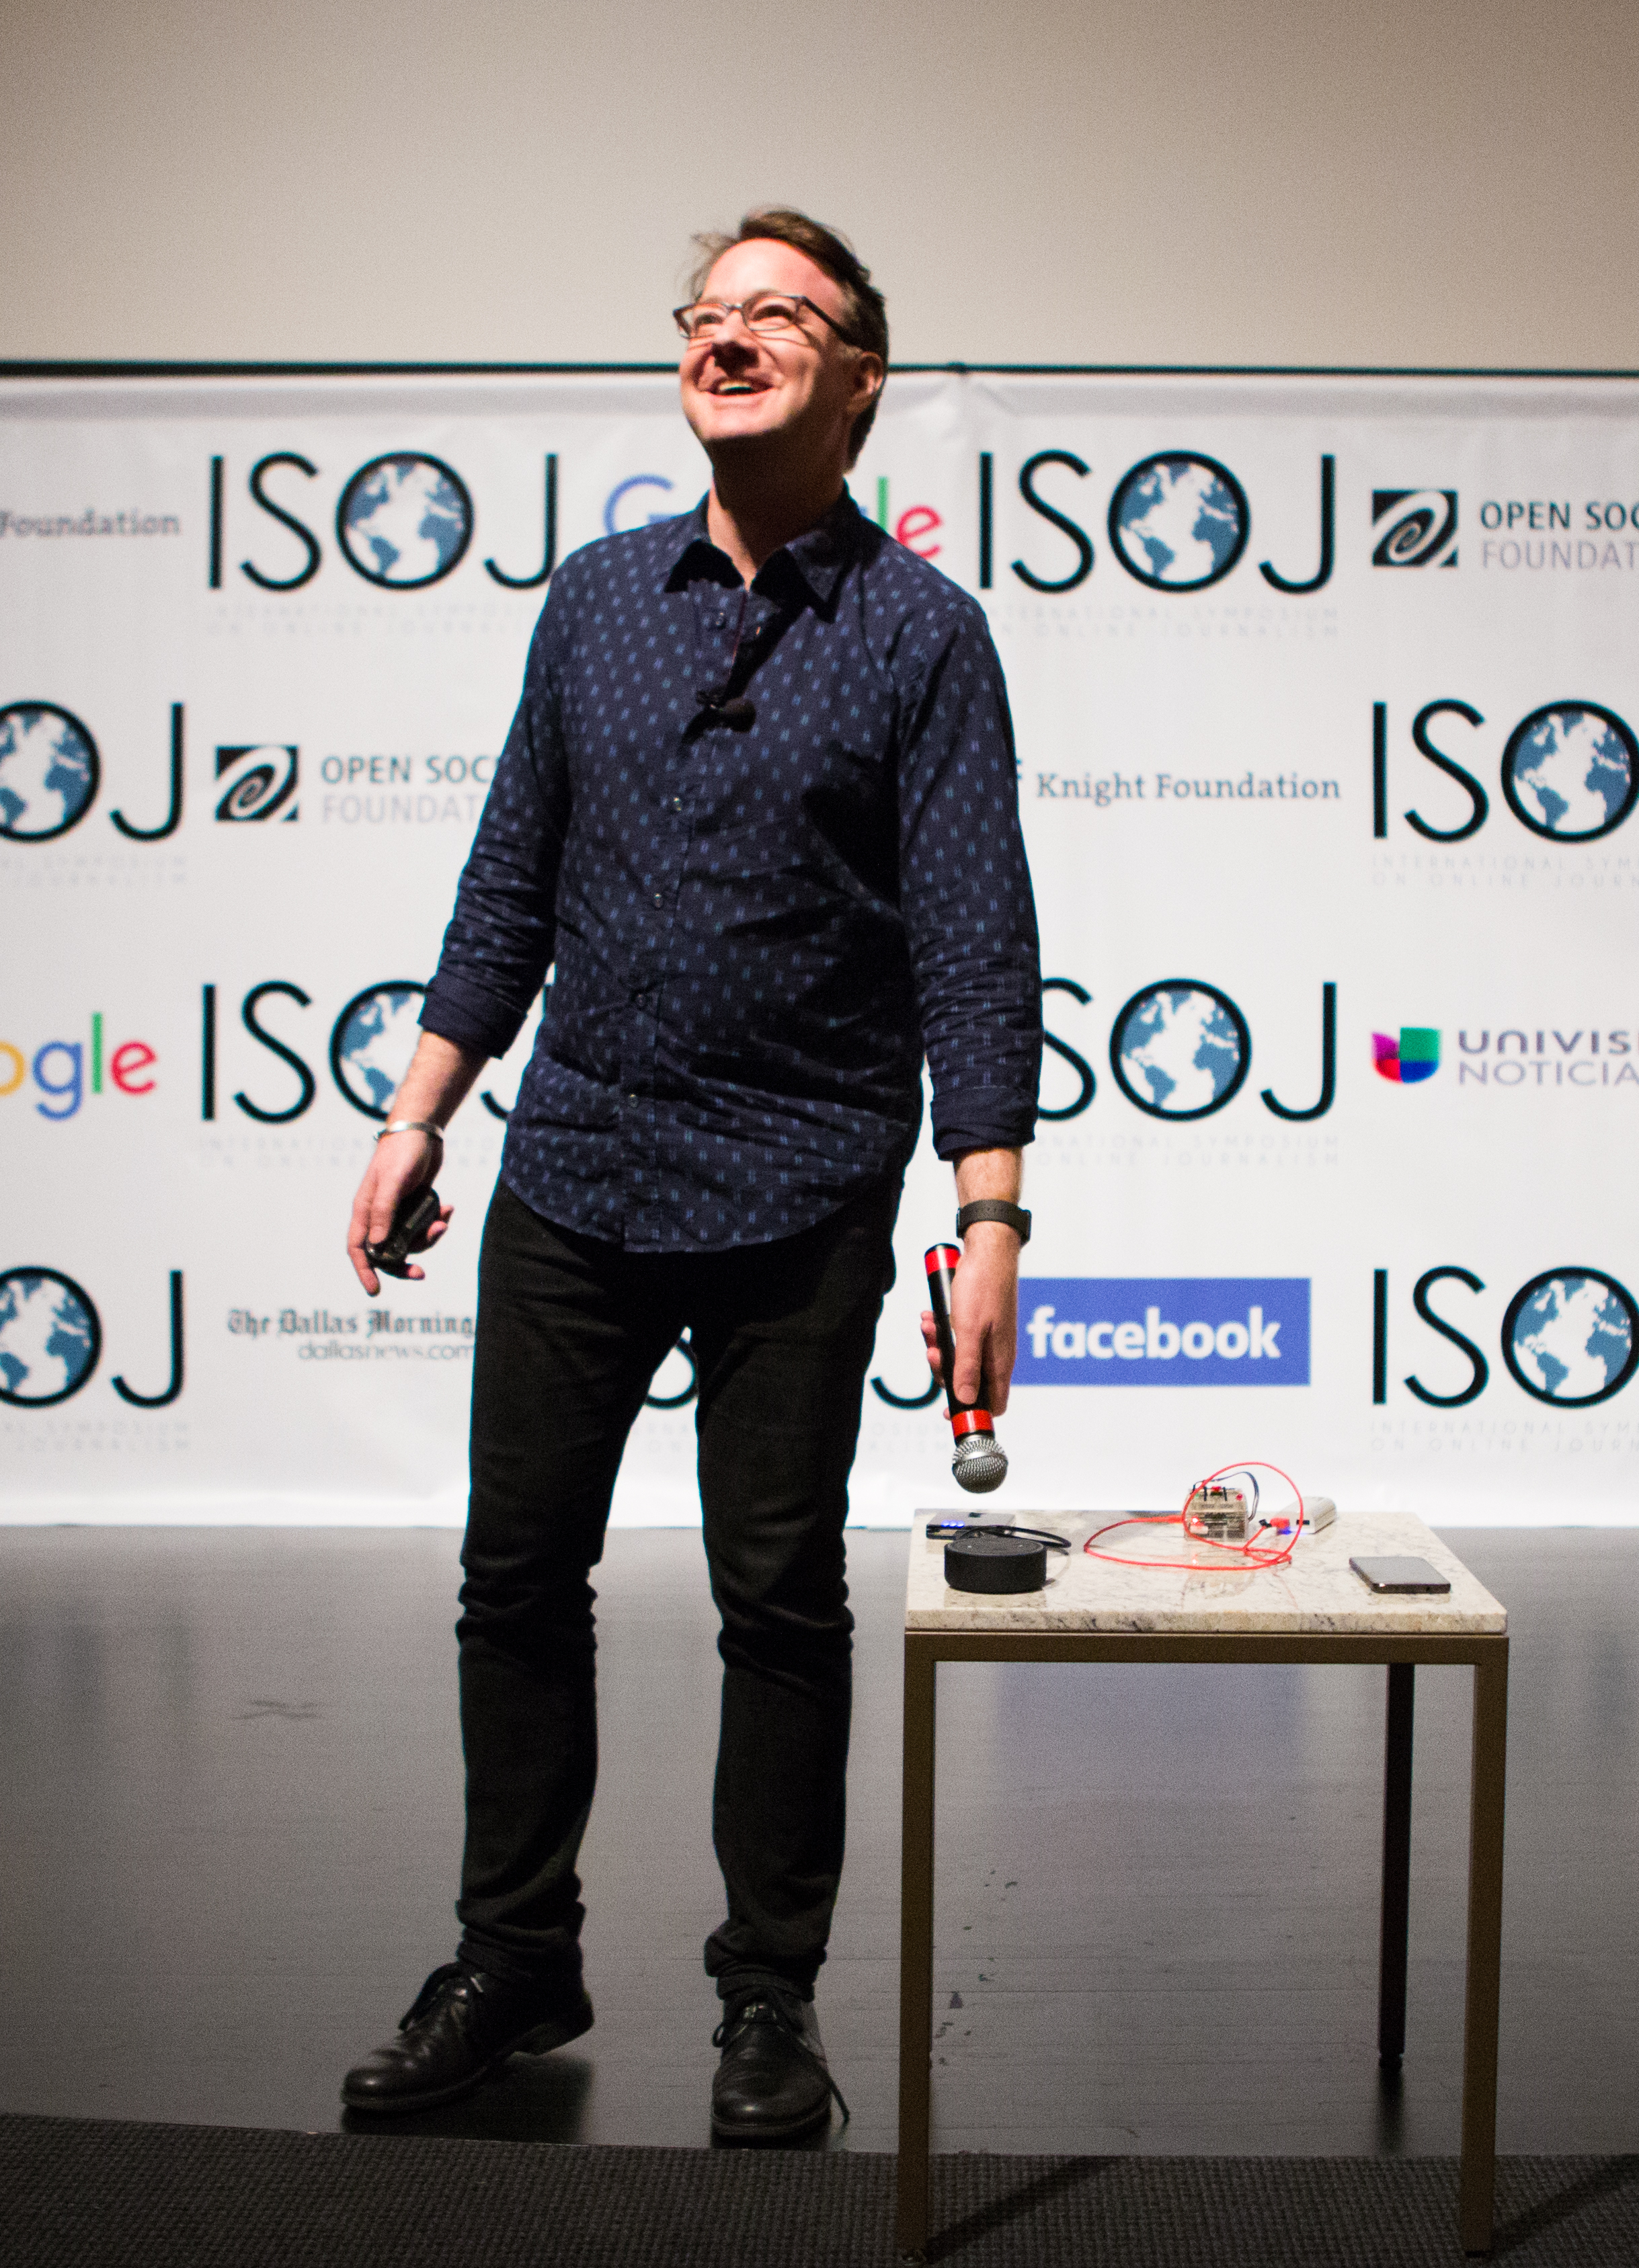 With help from bots like Amazon Alexa, John Keefe speaks at ISOJ 2017 about how journalists are using news bots to interact with their audiences. (Mary Kang/Knight Center)